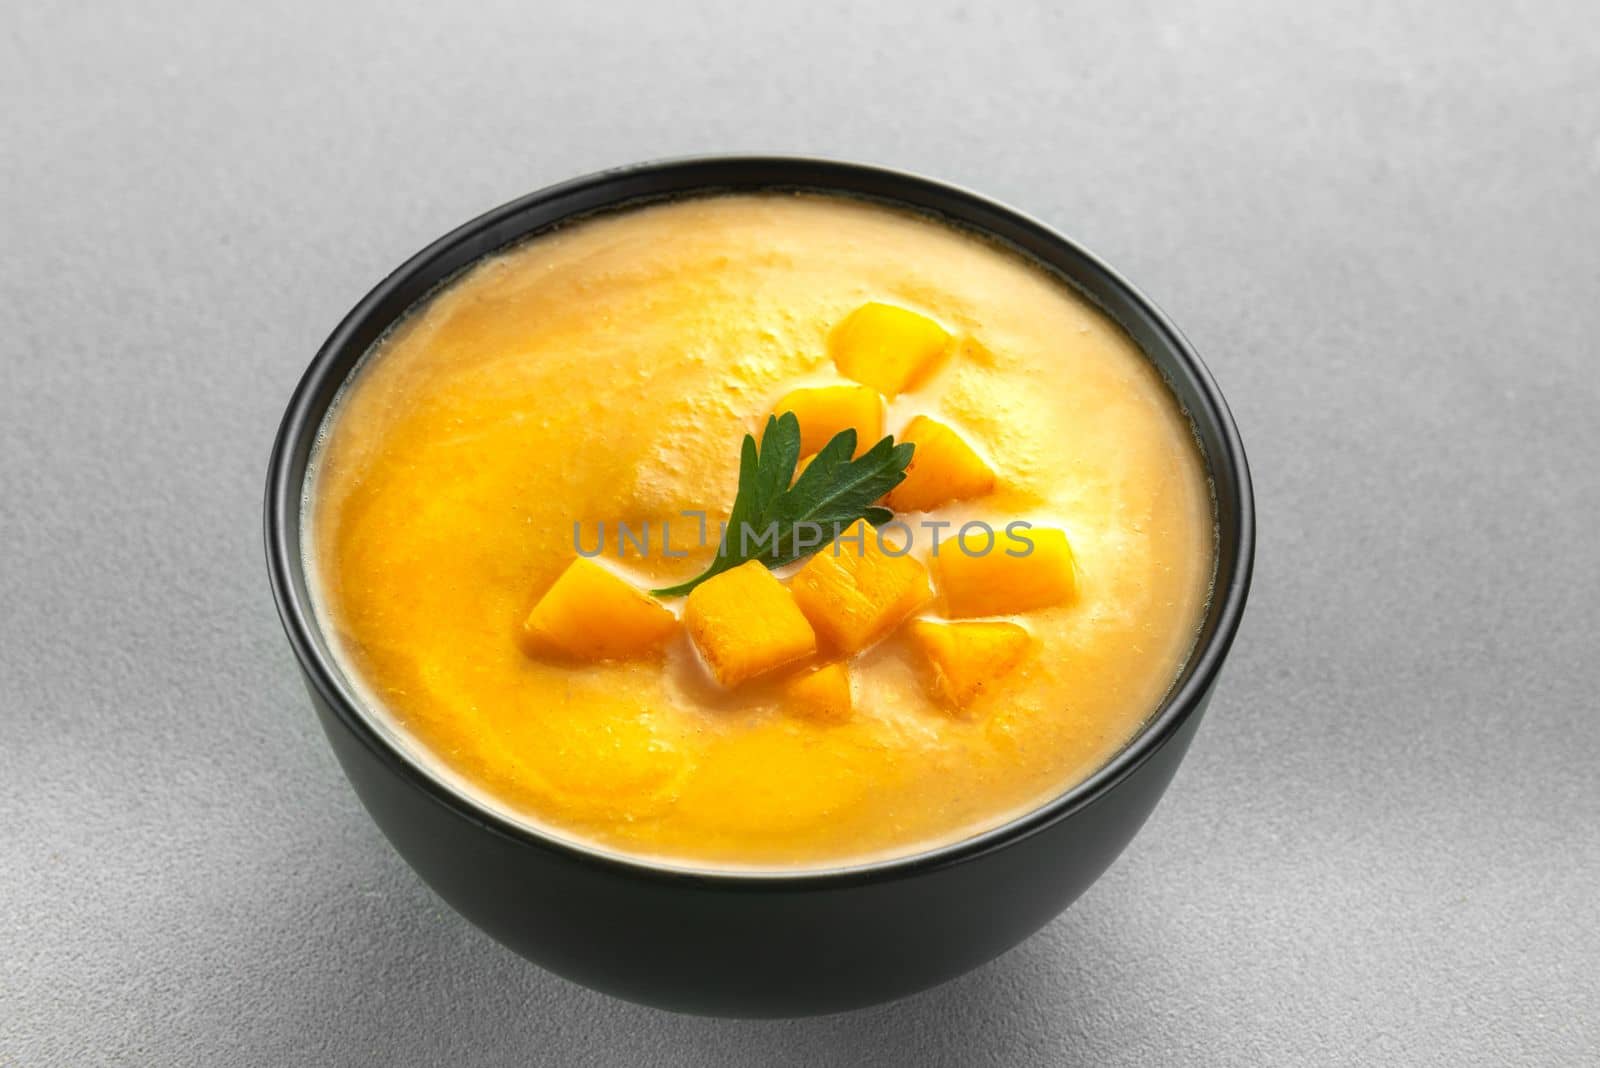 pumpkin cream soup mashed potatoes on a gray background by gulyaevstudio